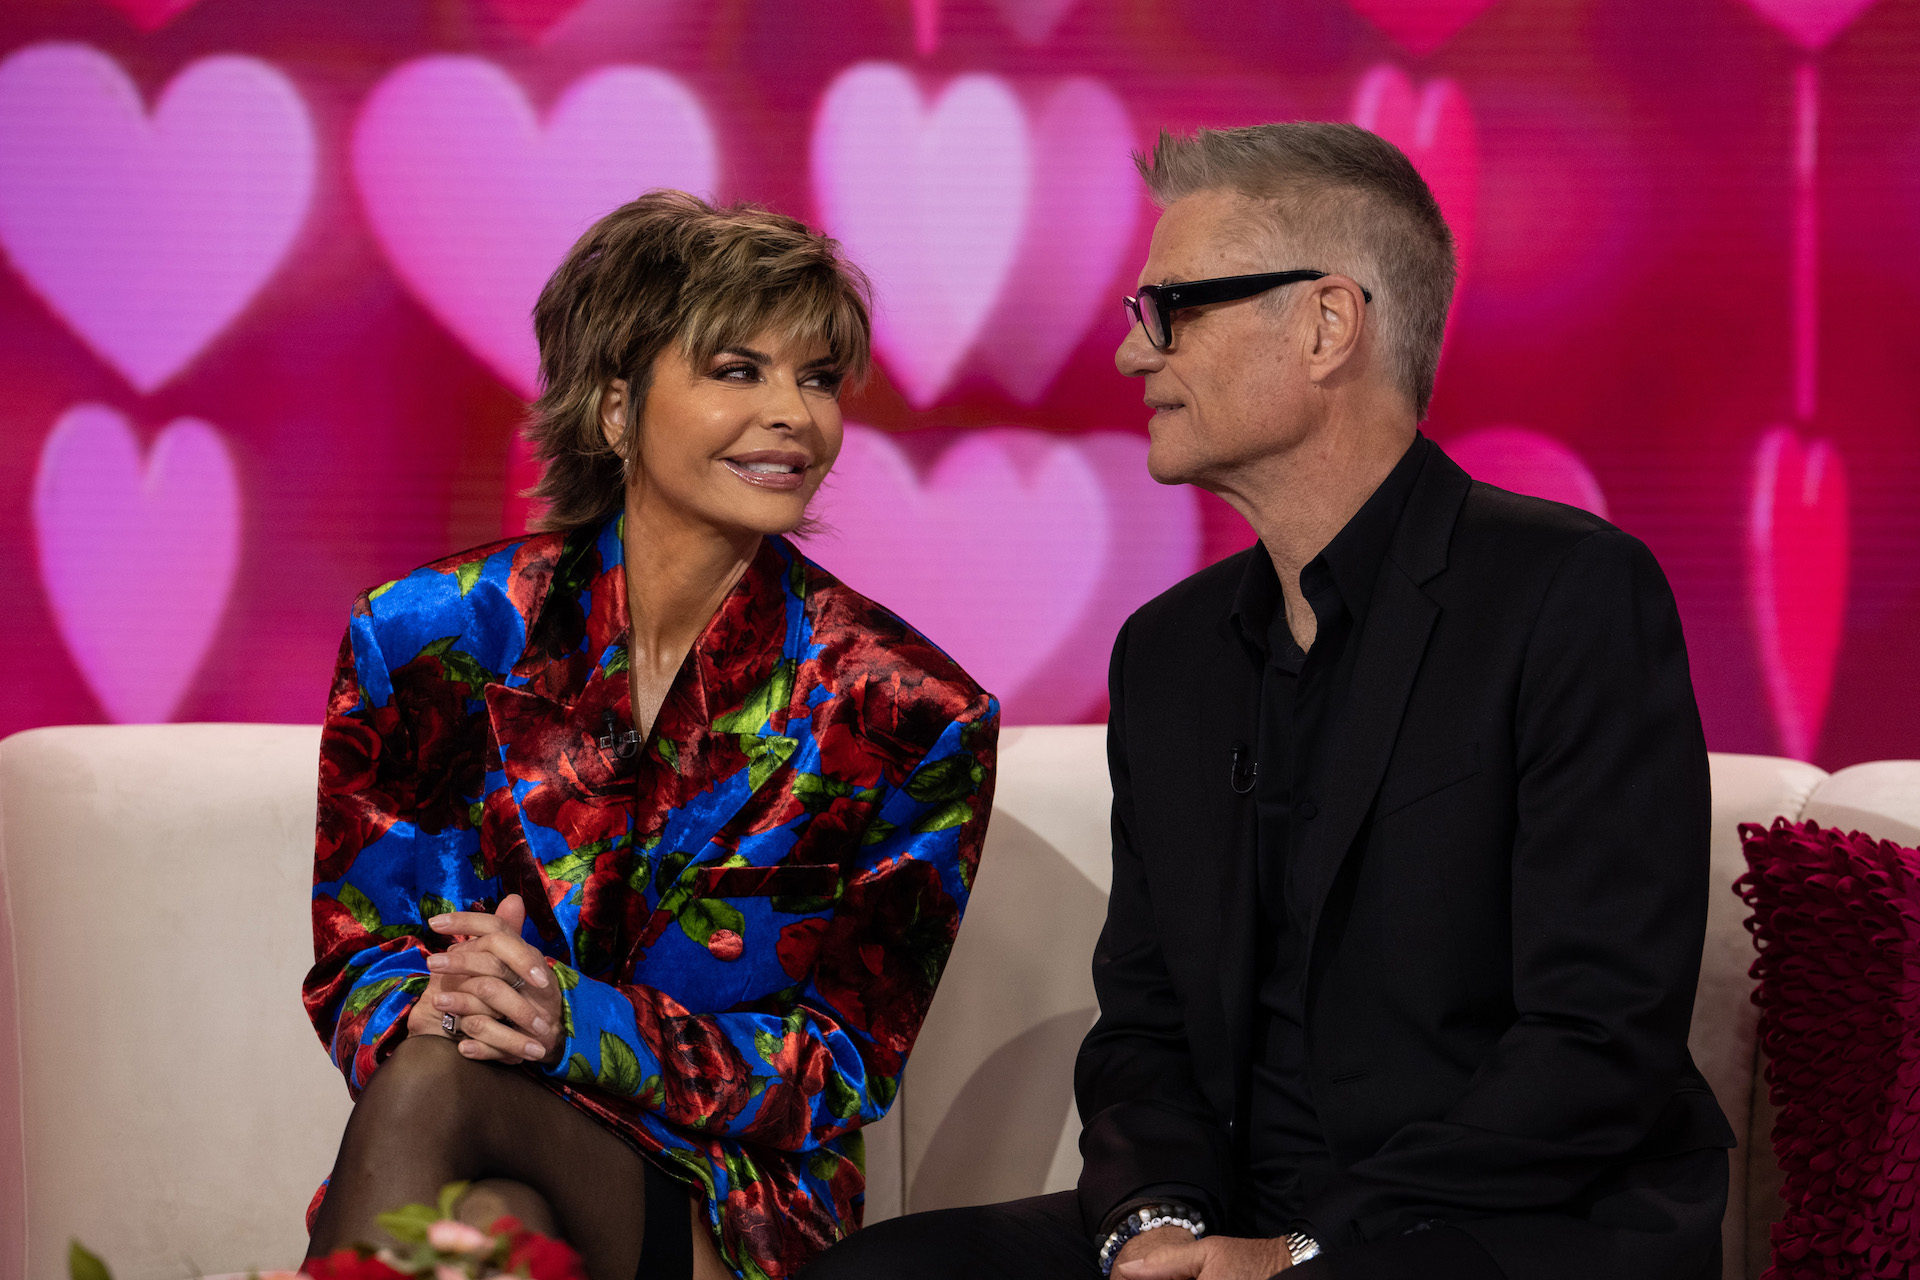 TODAY -- Pictured: Lisa Rinna and Harry Hamlin on Tuesday, February 14, 2023 